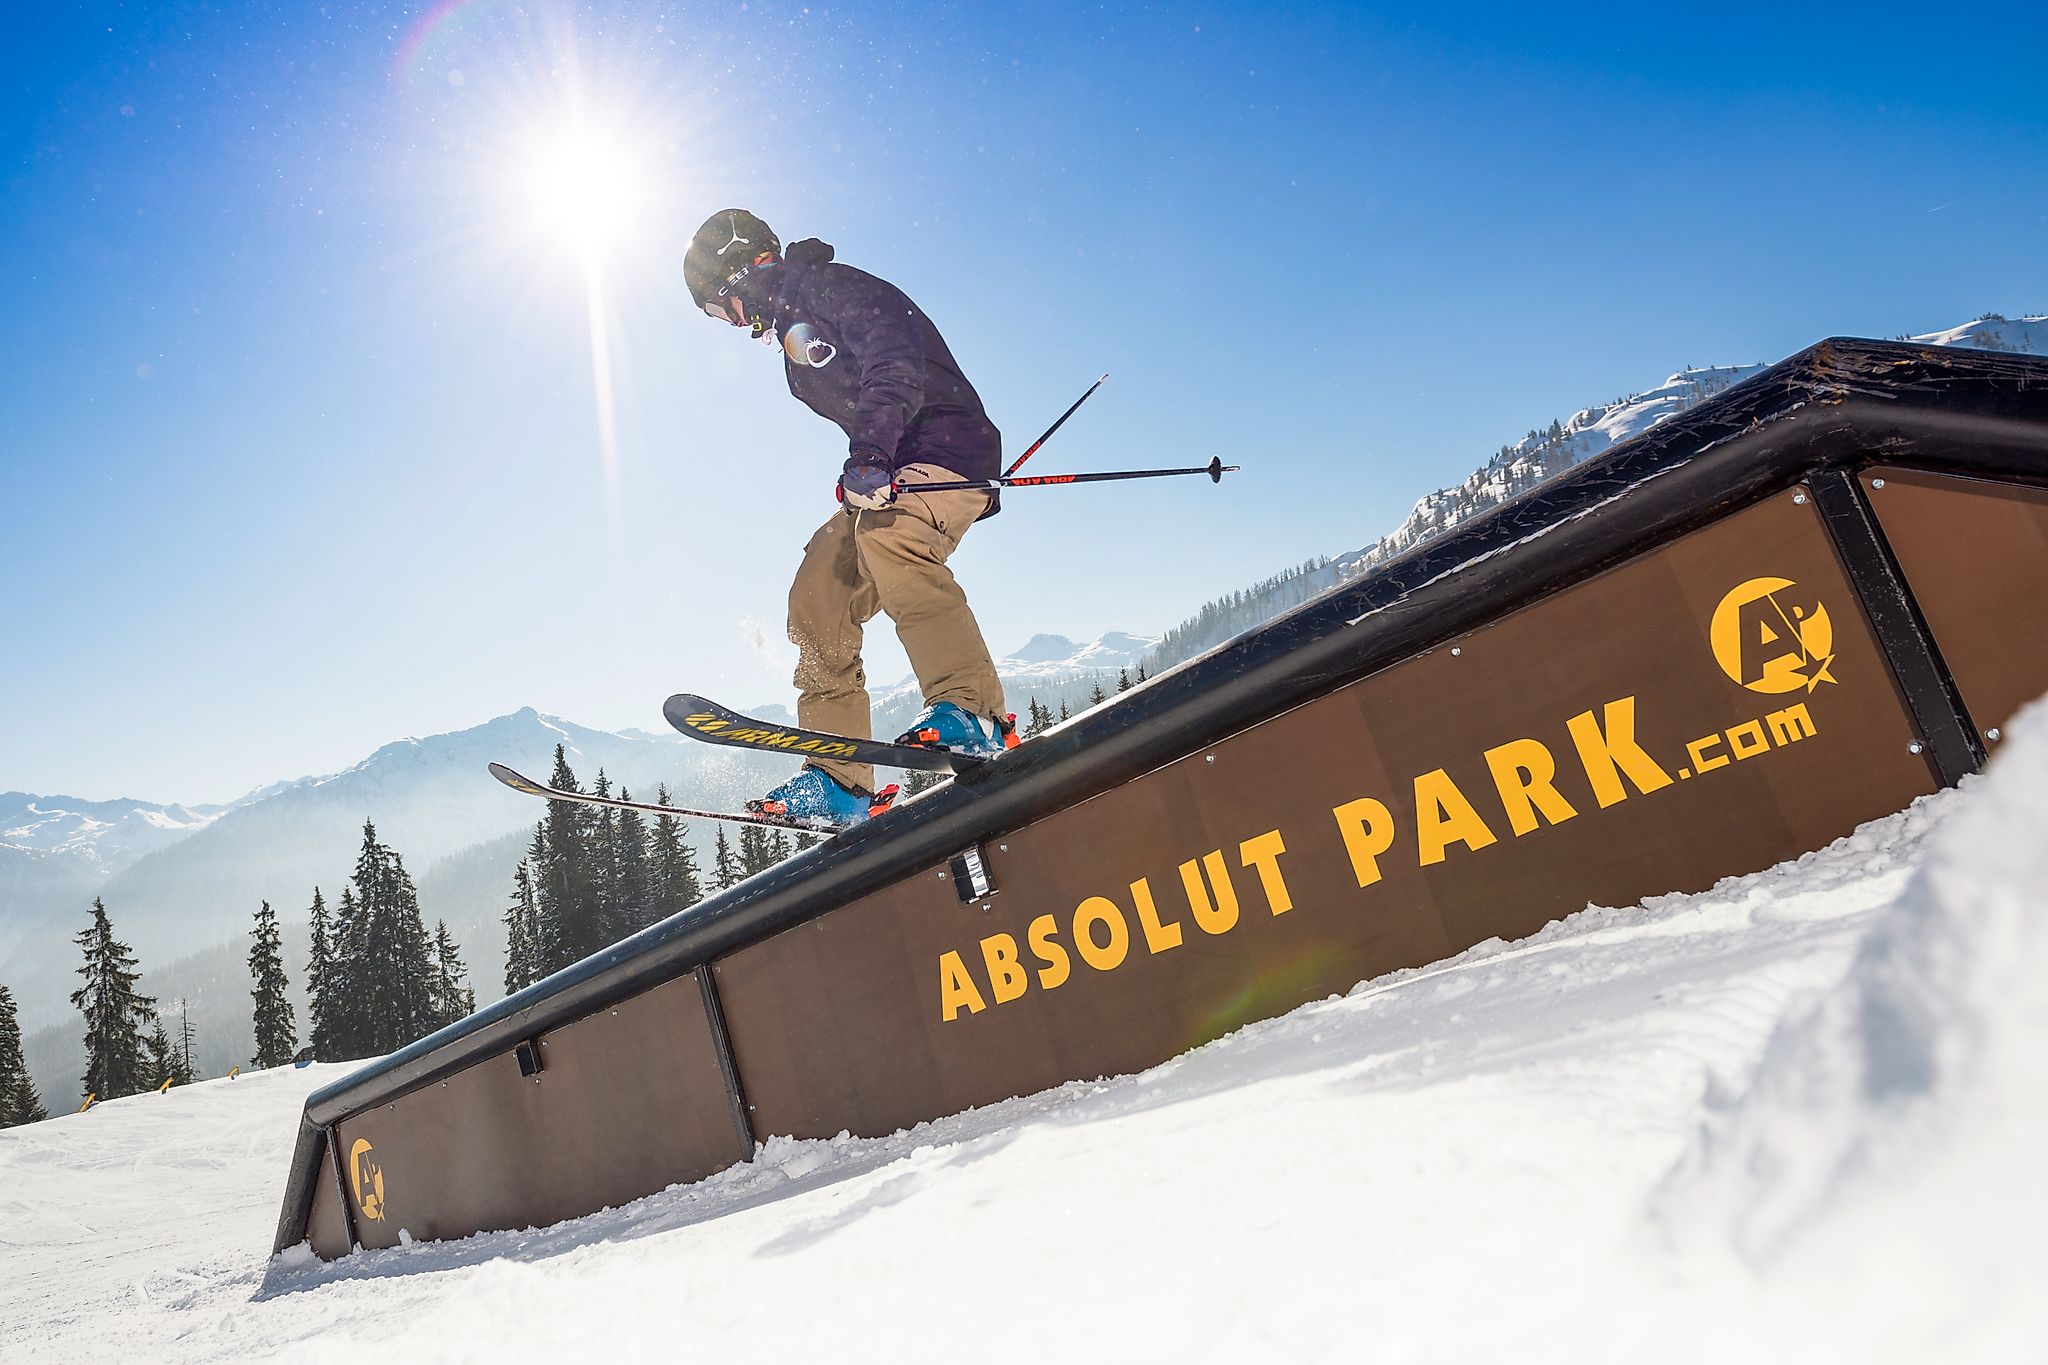 <p>The Absolutpark at Shuttleberg Flachauwinkl offers lots of obstacles for snowboarders and freeskiers.</p>